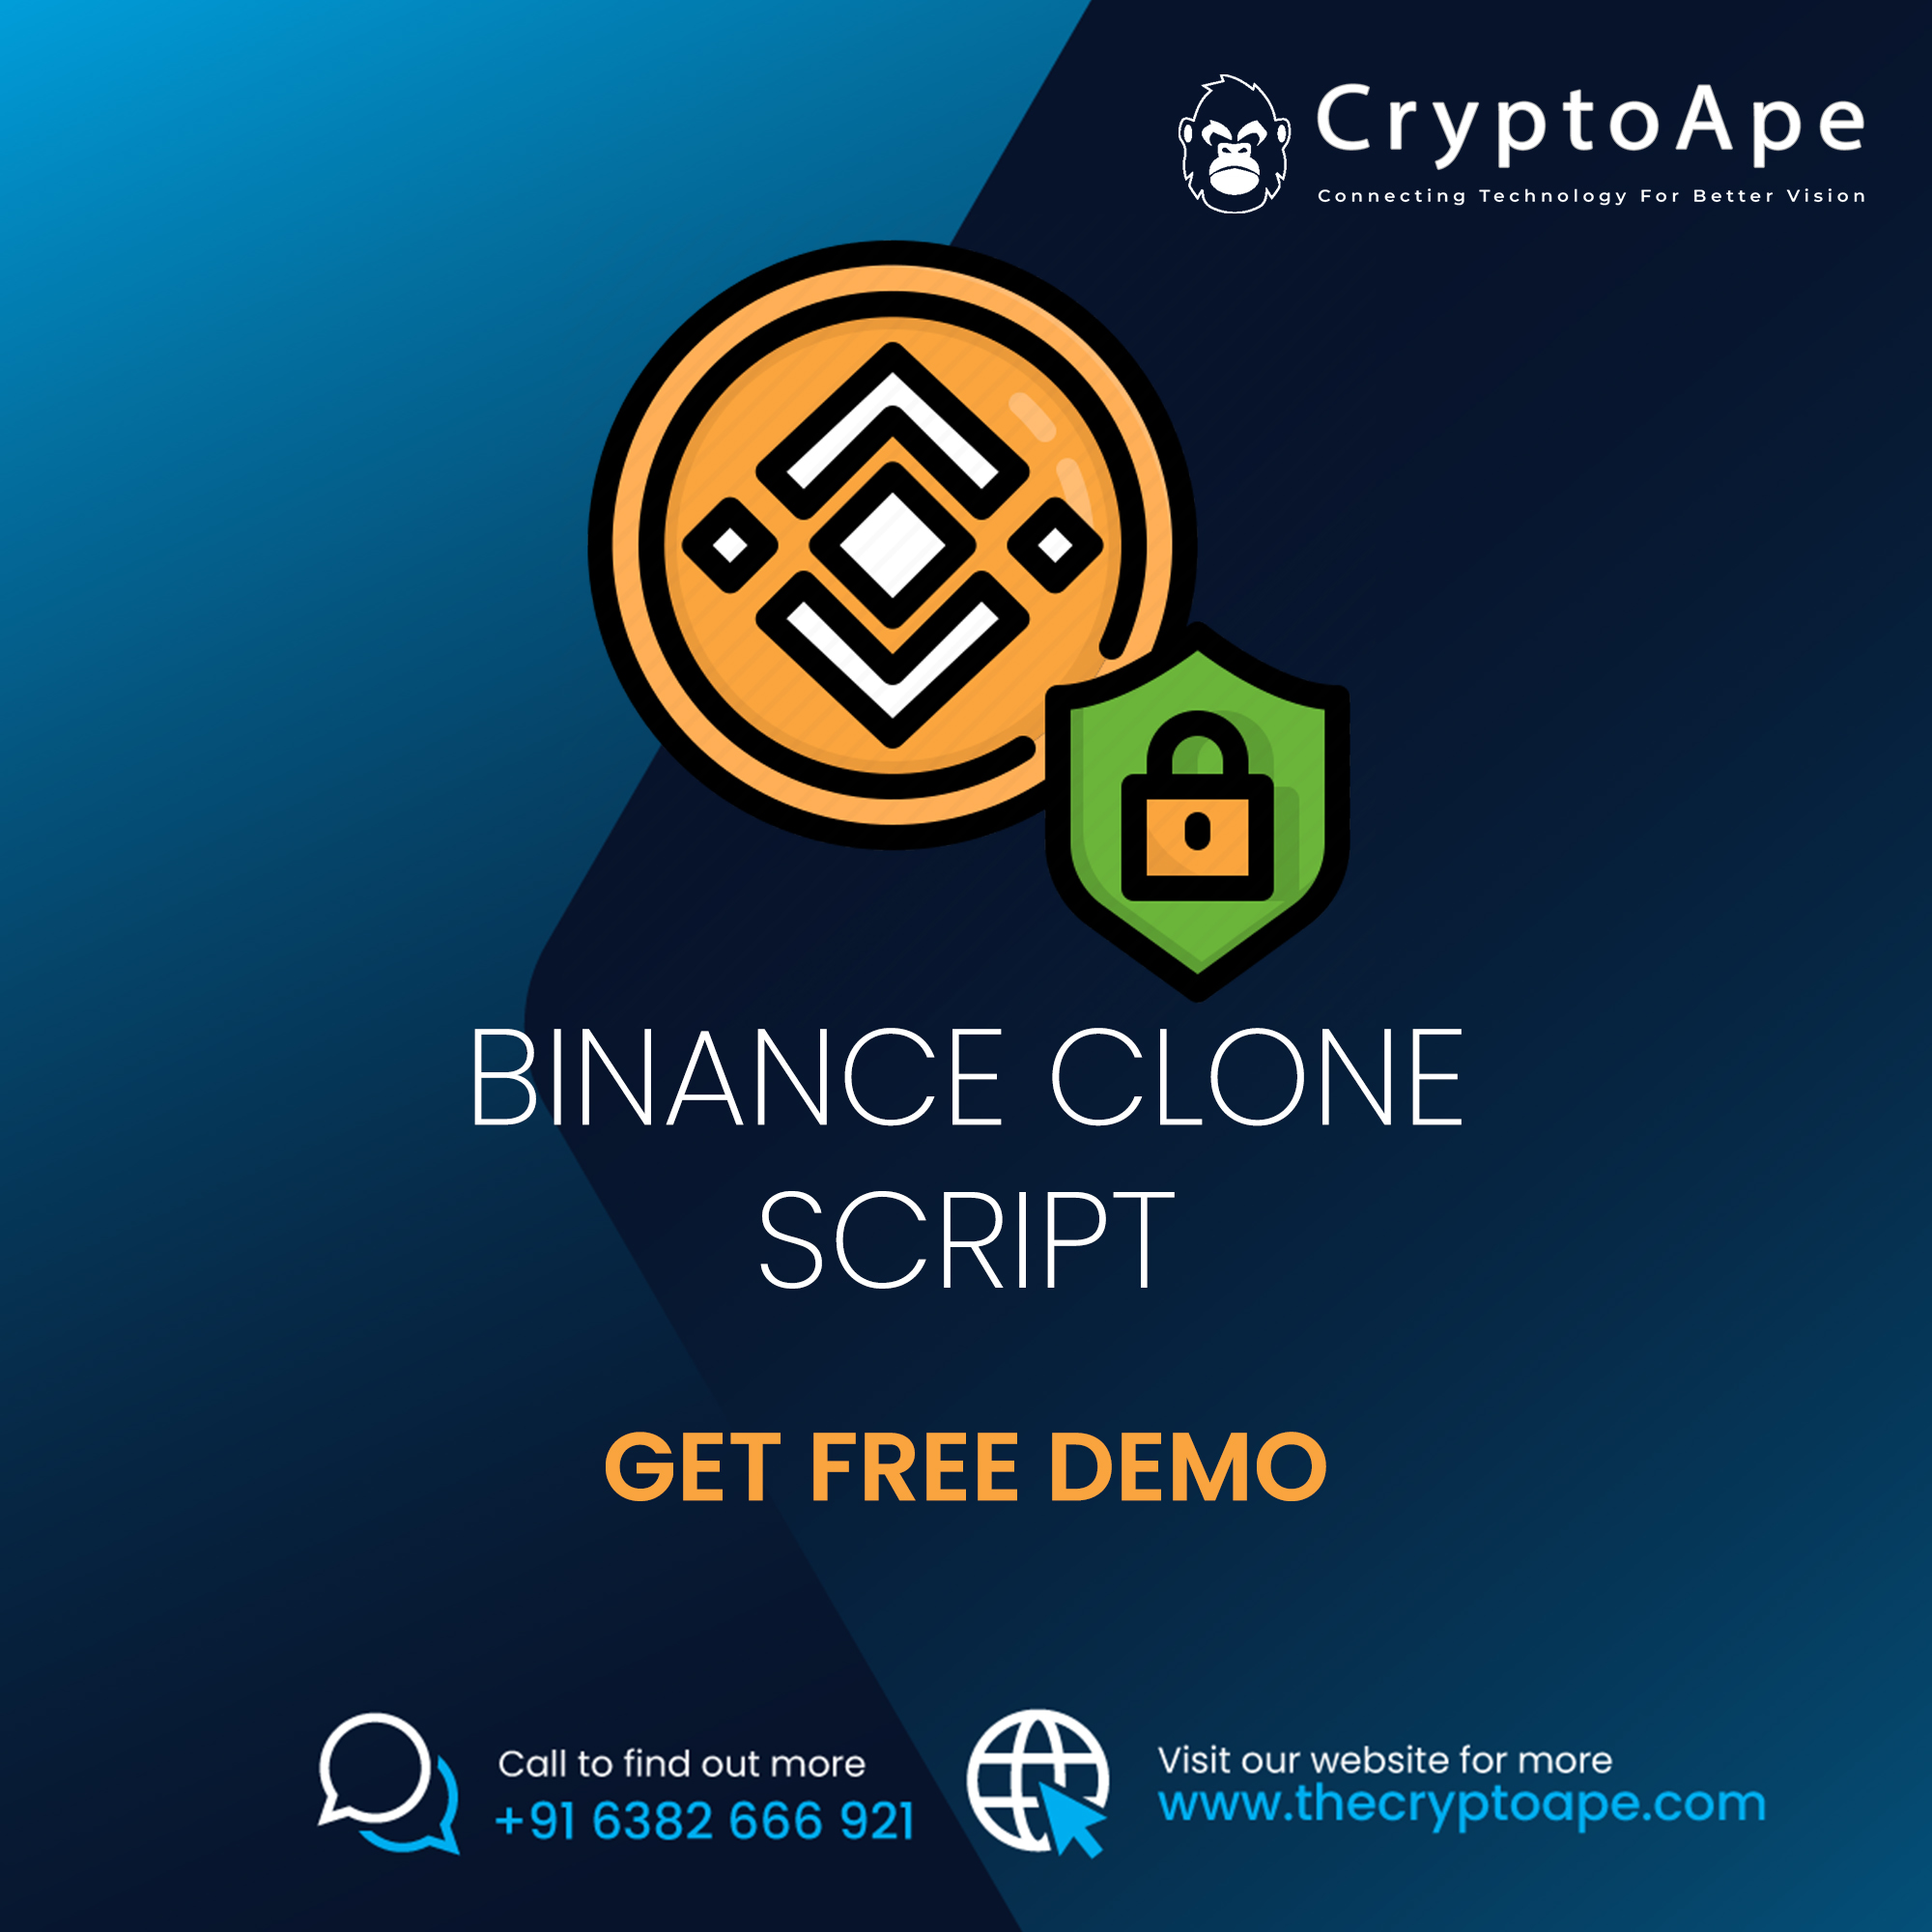 ORACLE
ZR
7
BINANCE CLONE

SCRIPT

GET FREE DEMO

9) Call to find out more Visit our website for more
+91 6382 666 921 3 www.thecryptoape.com